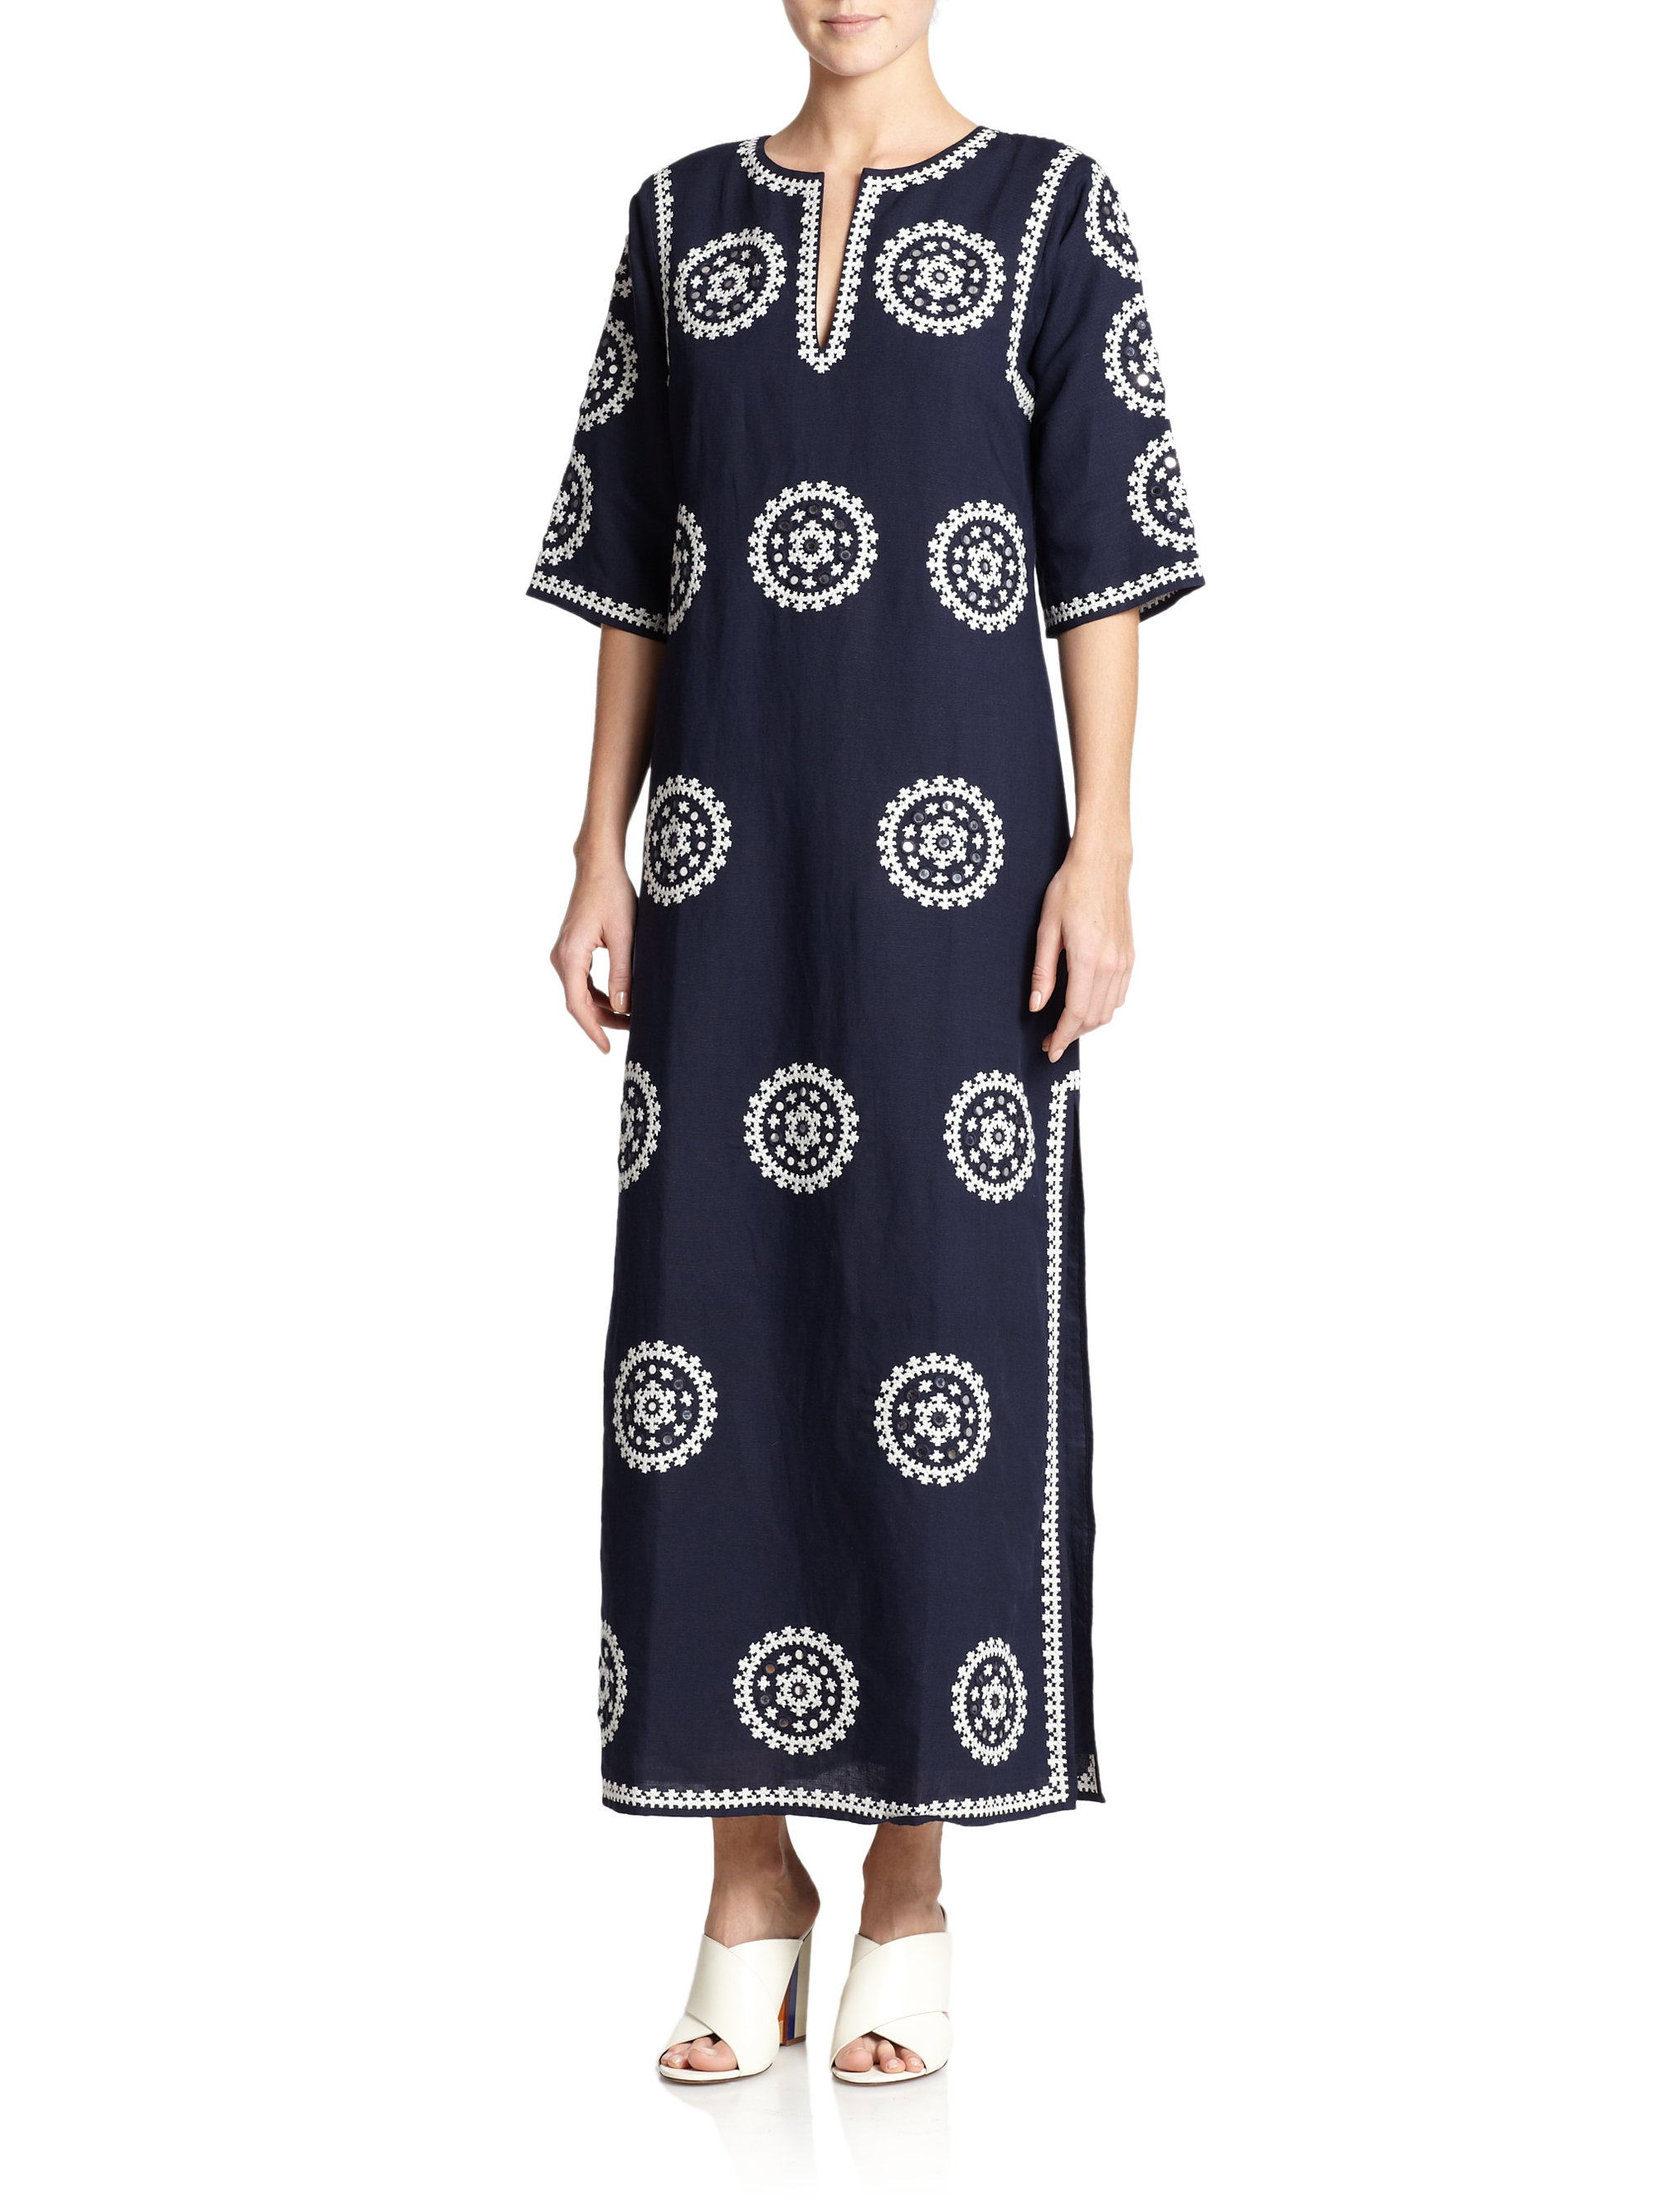 Lyst - Tory Burch Embroidered Tunic Dress in Blue